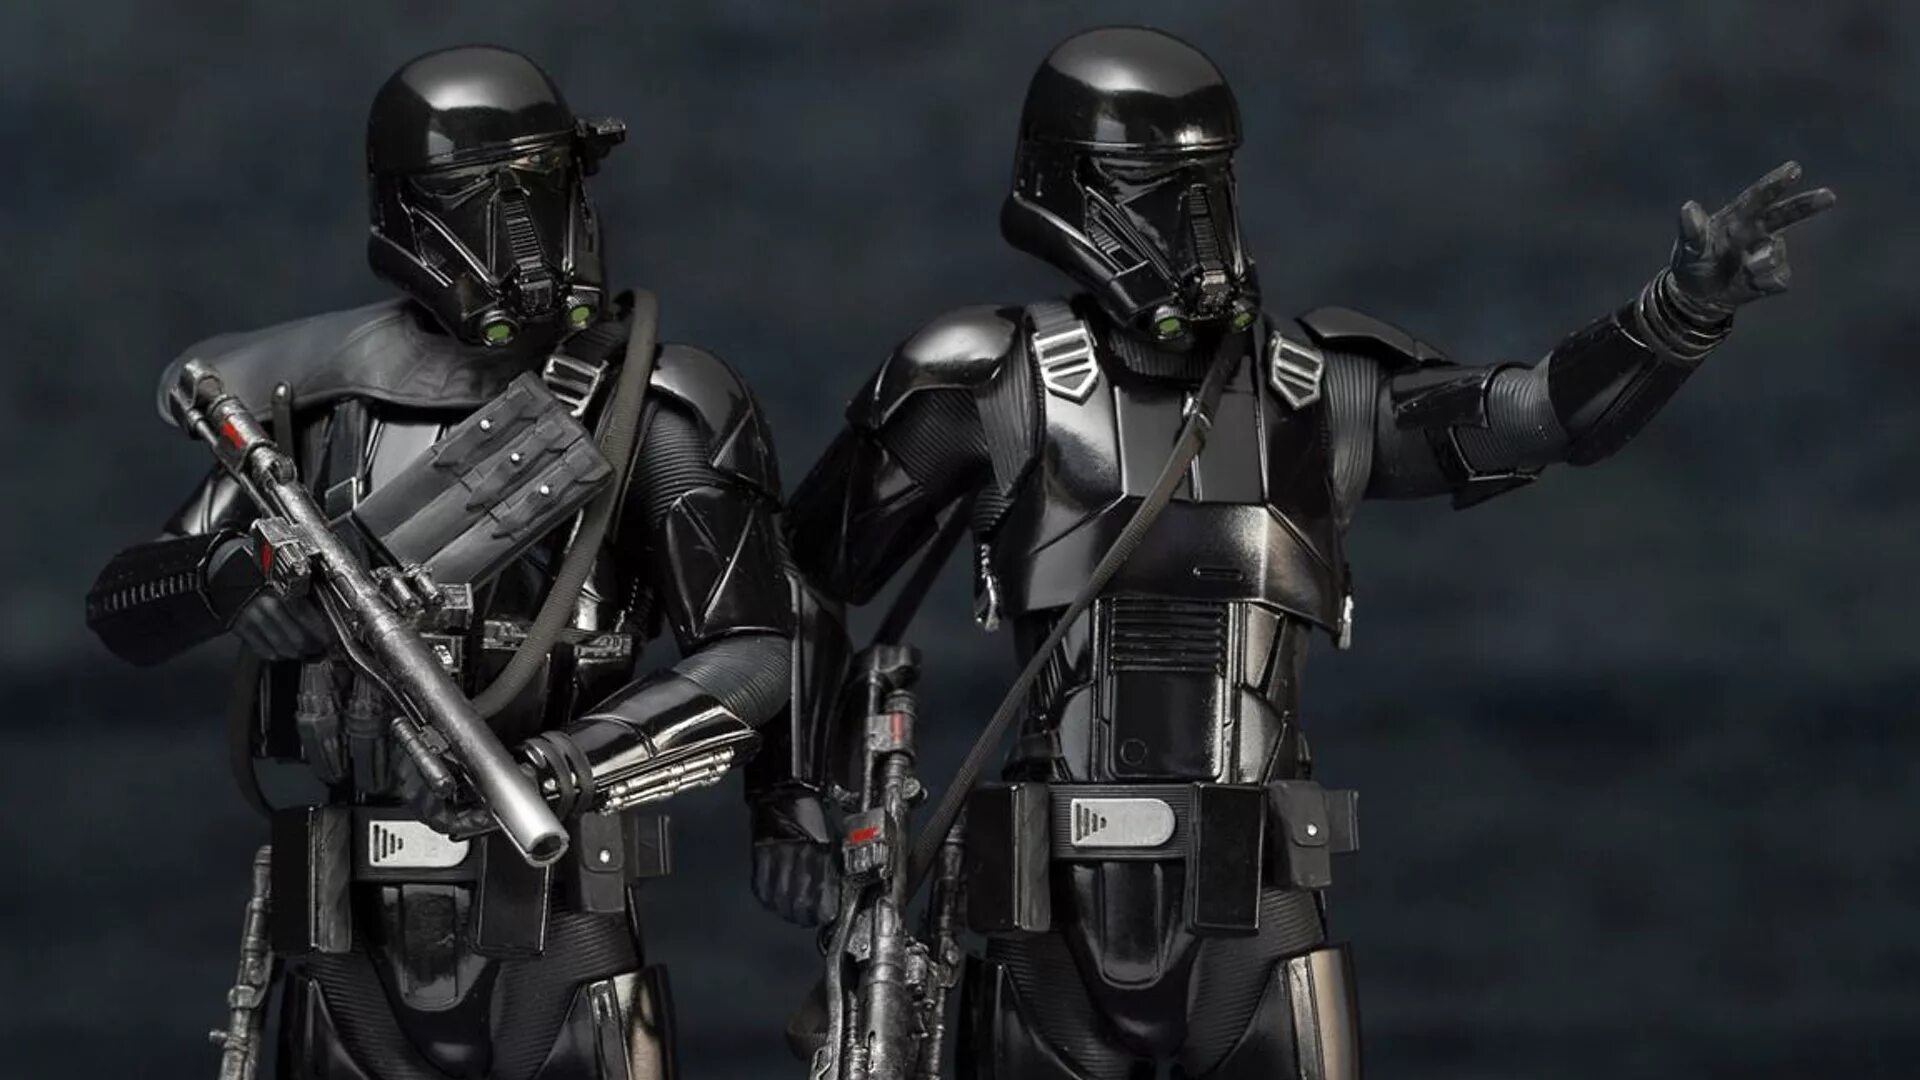 Death troopers